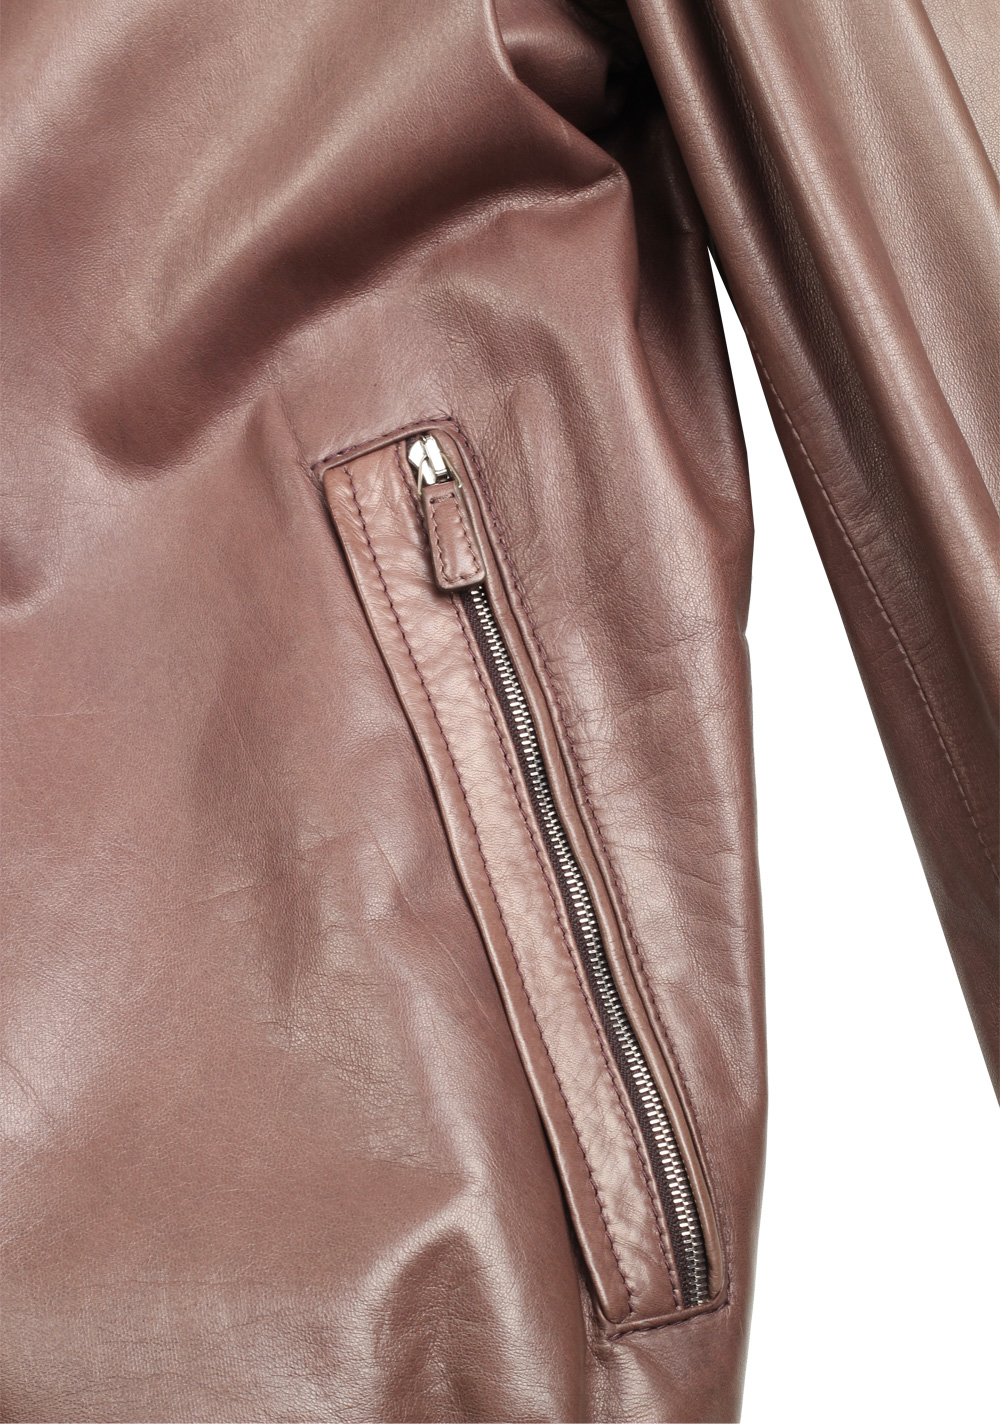 Zegna Reversible Leather Jacket in Brown for Men